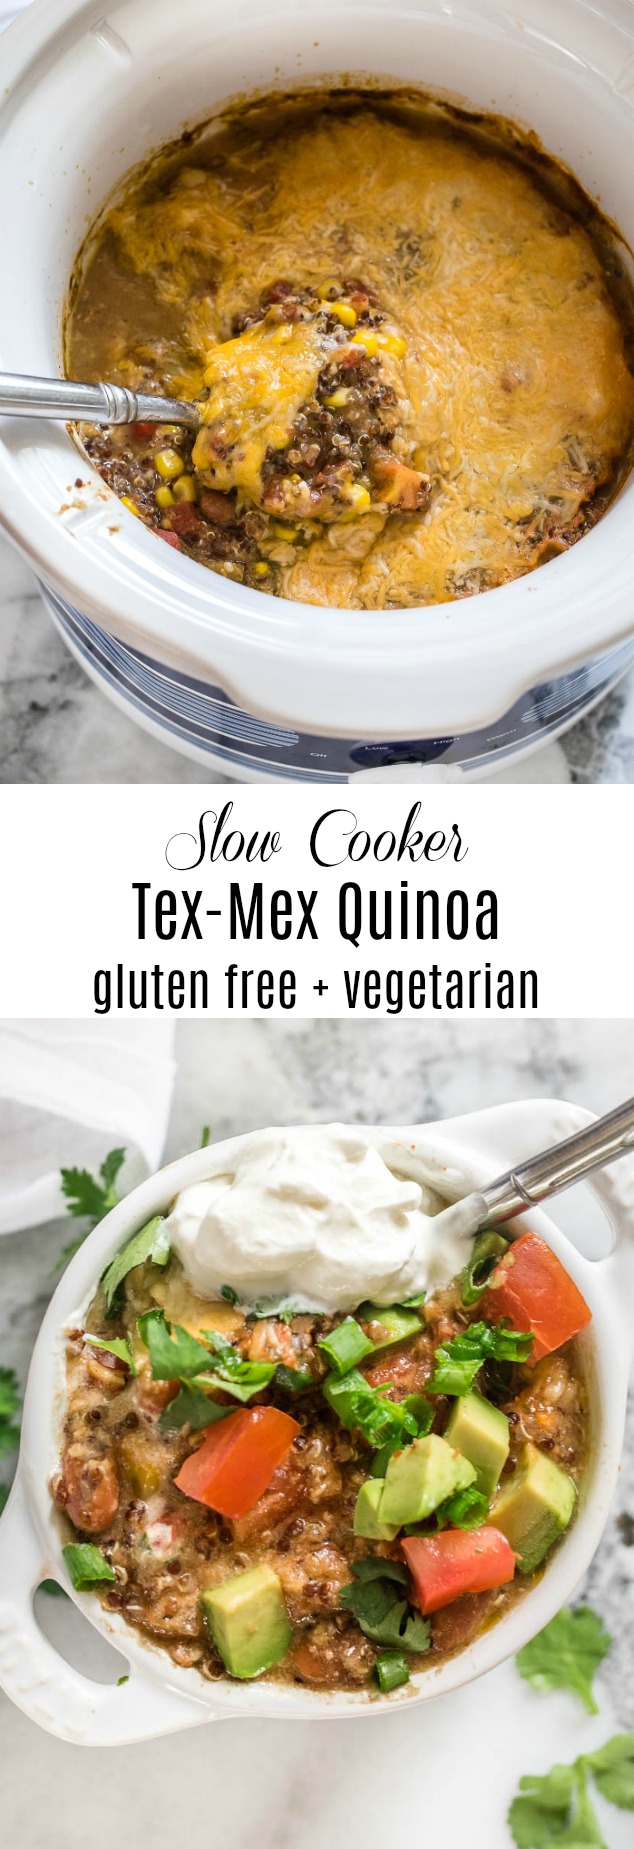 Slow Cooker Tex-Mex Quinoa is a gluten free, vegetarian meal that is a breeze to throw together and packed with long lasting plant protein.